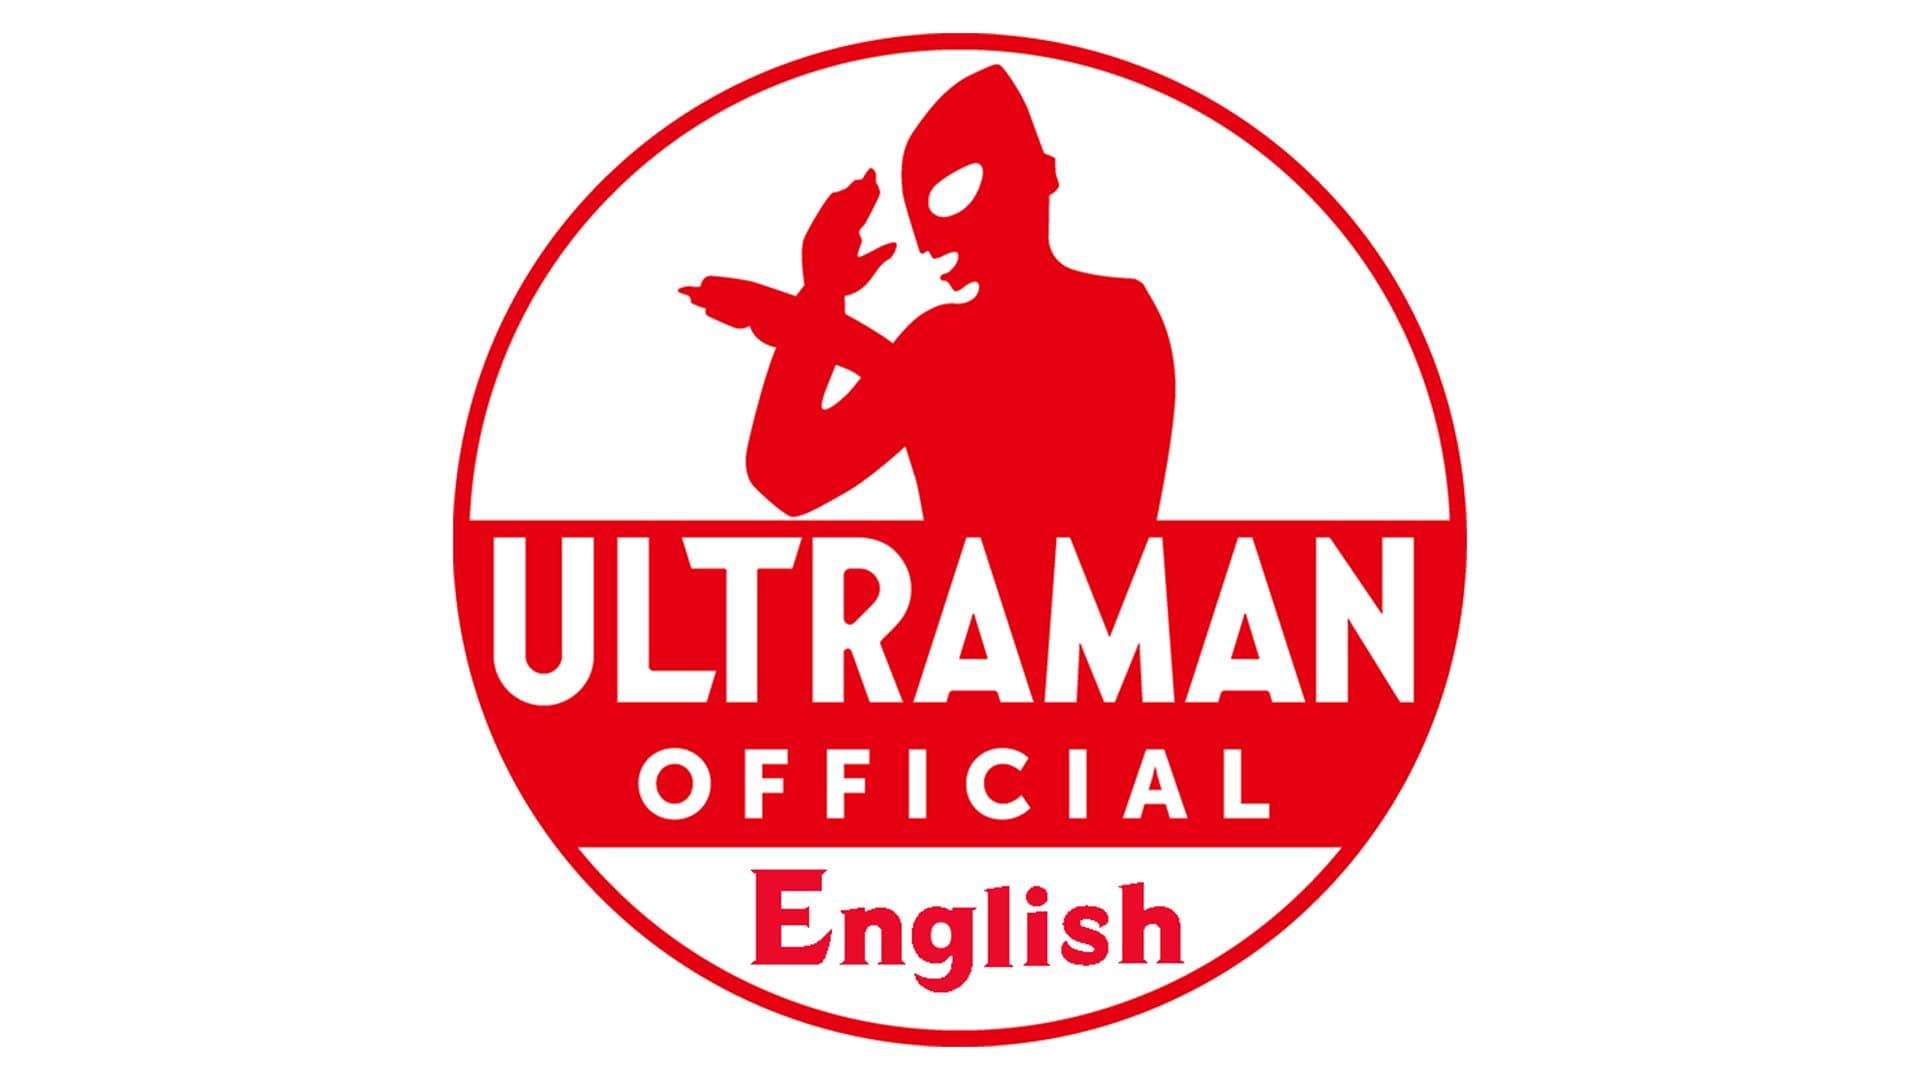 Check out Ultraman Arc on the Brand-New Ultraman Official English Channel!